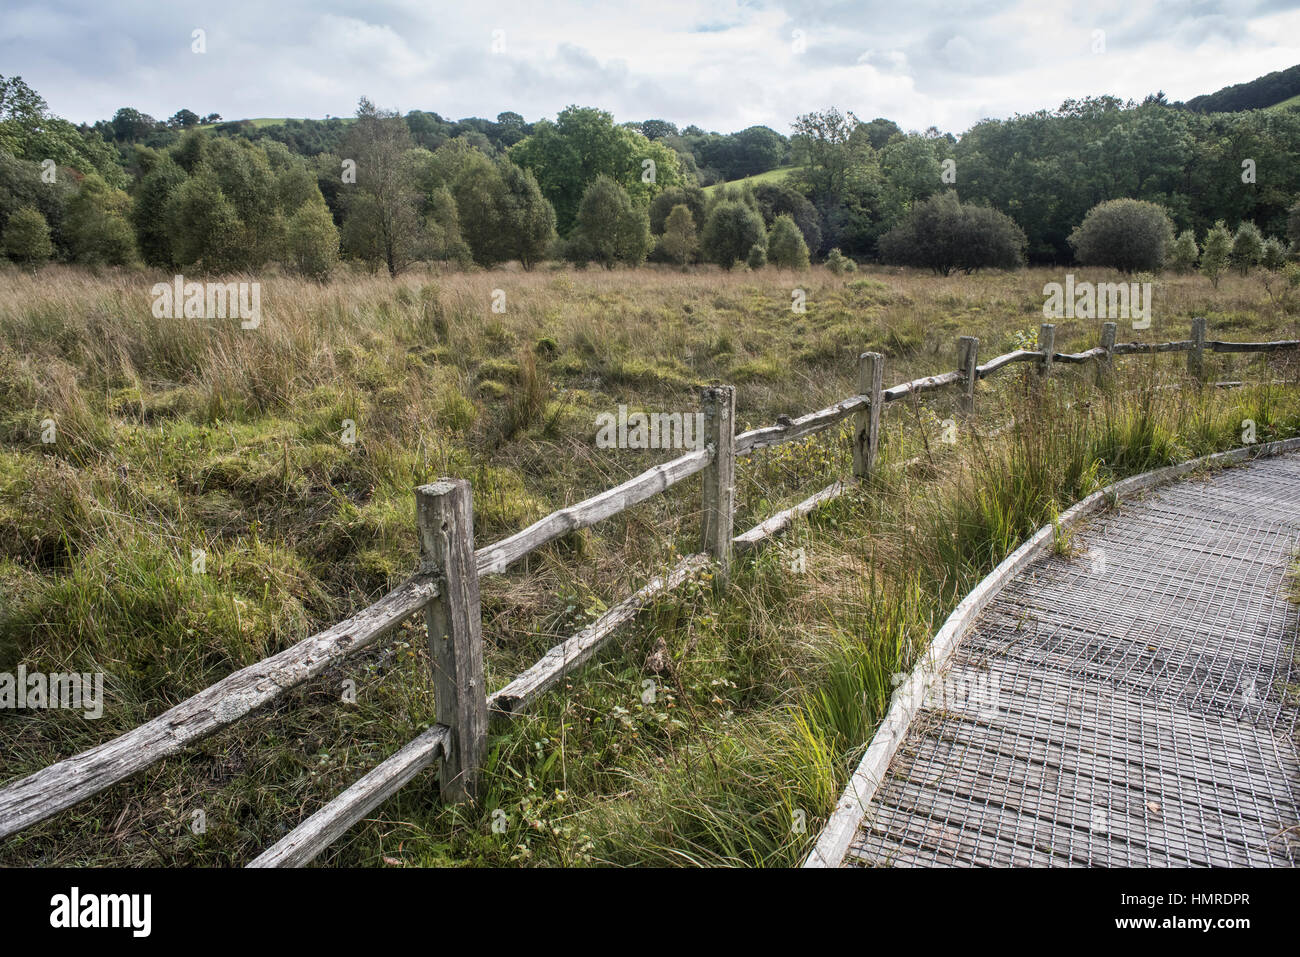 Boardwalk and landscape at Cars Caron National Nature Reserve, Tregaron, Wales Stock Photo